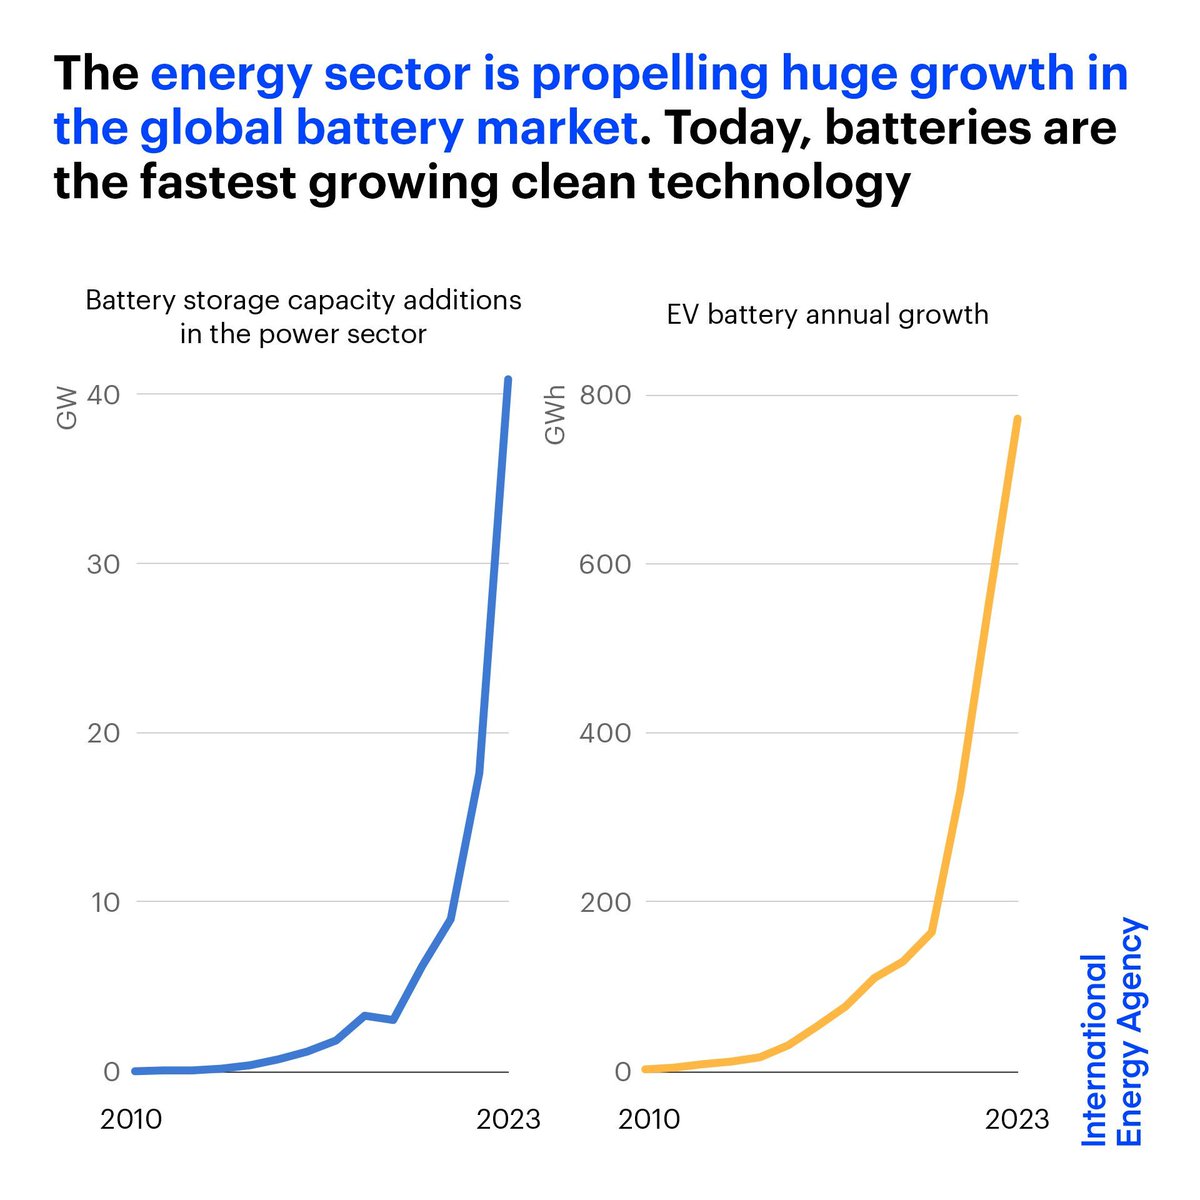 Batteries are a vital part of the energy transition 🔋 ✅ They’re the fastest growing clean technology on the market ✅ They help meet climate goals & ensure energy security ✅ They bring down emissions in power & transport More 👉 iea.li/3VaShlx